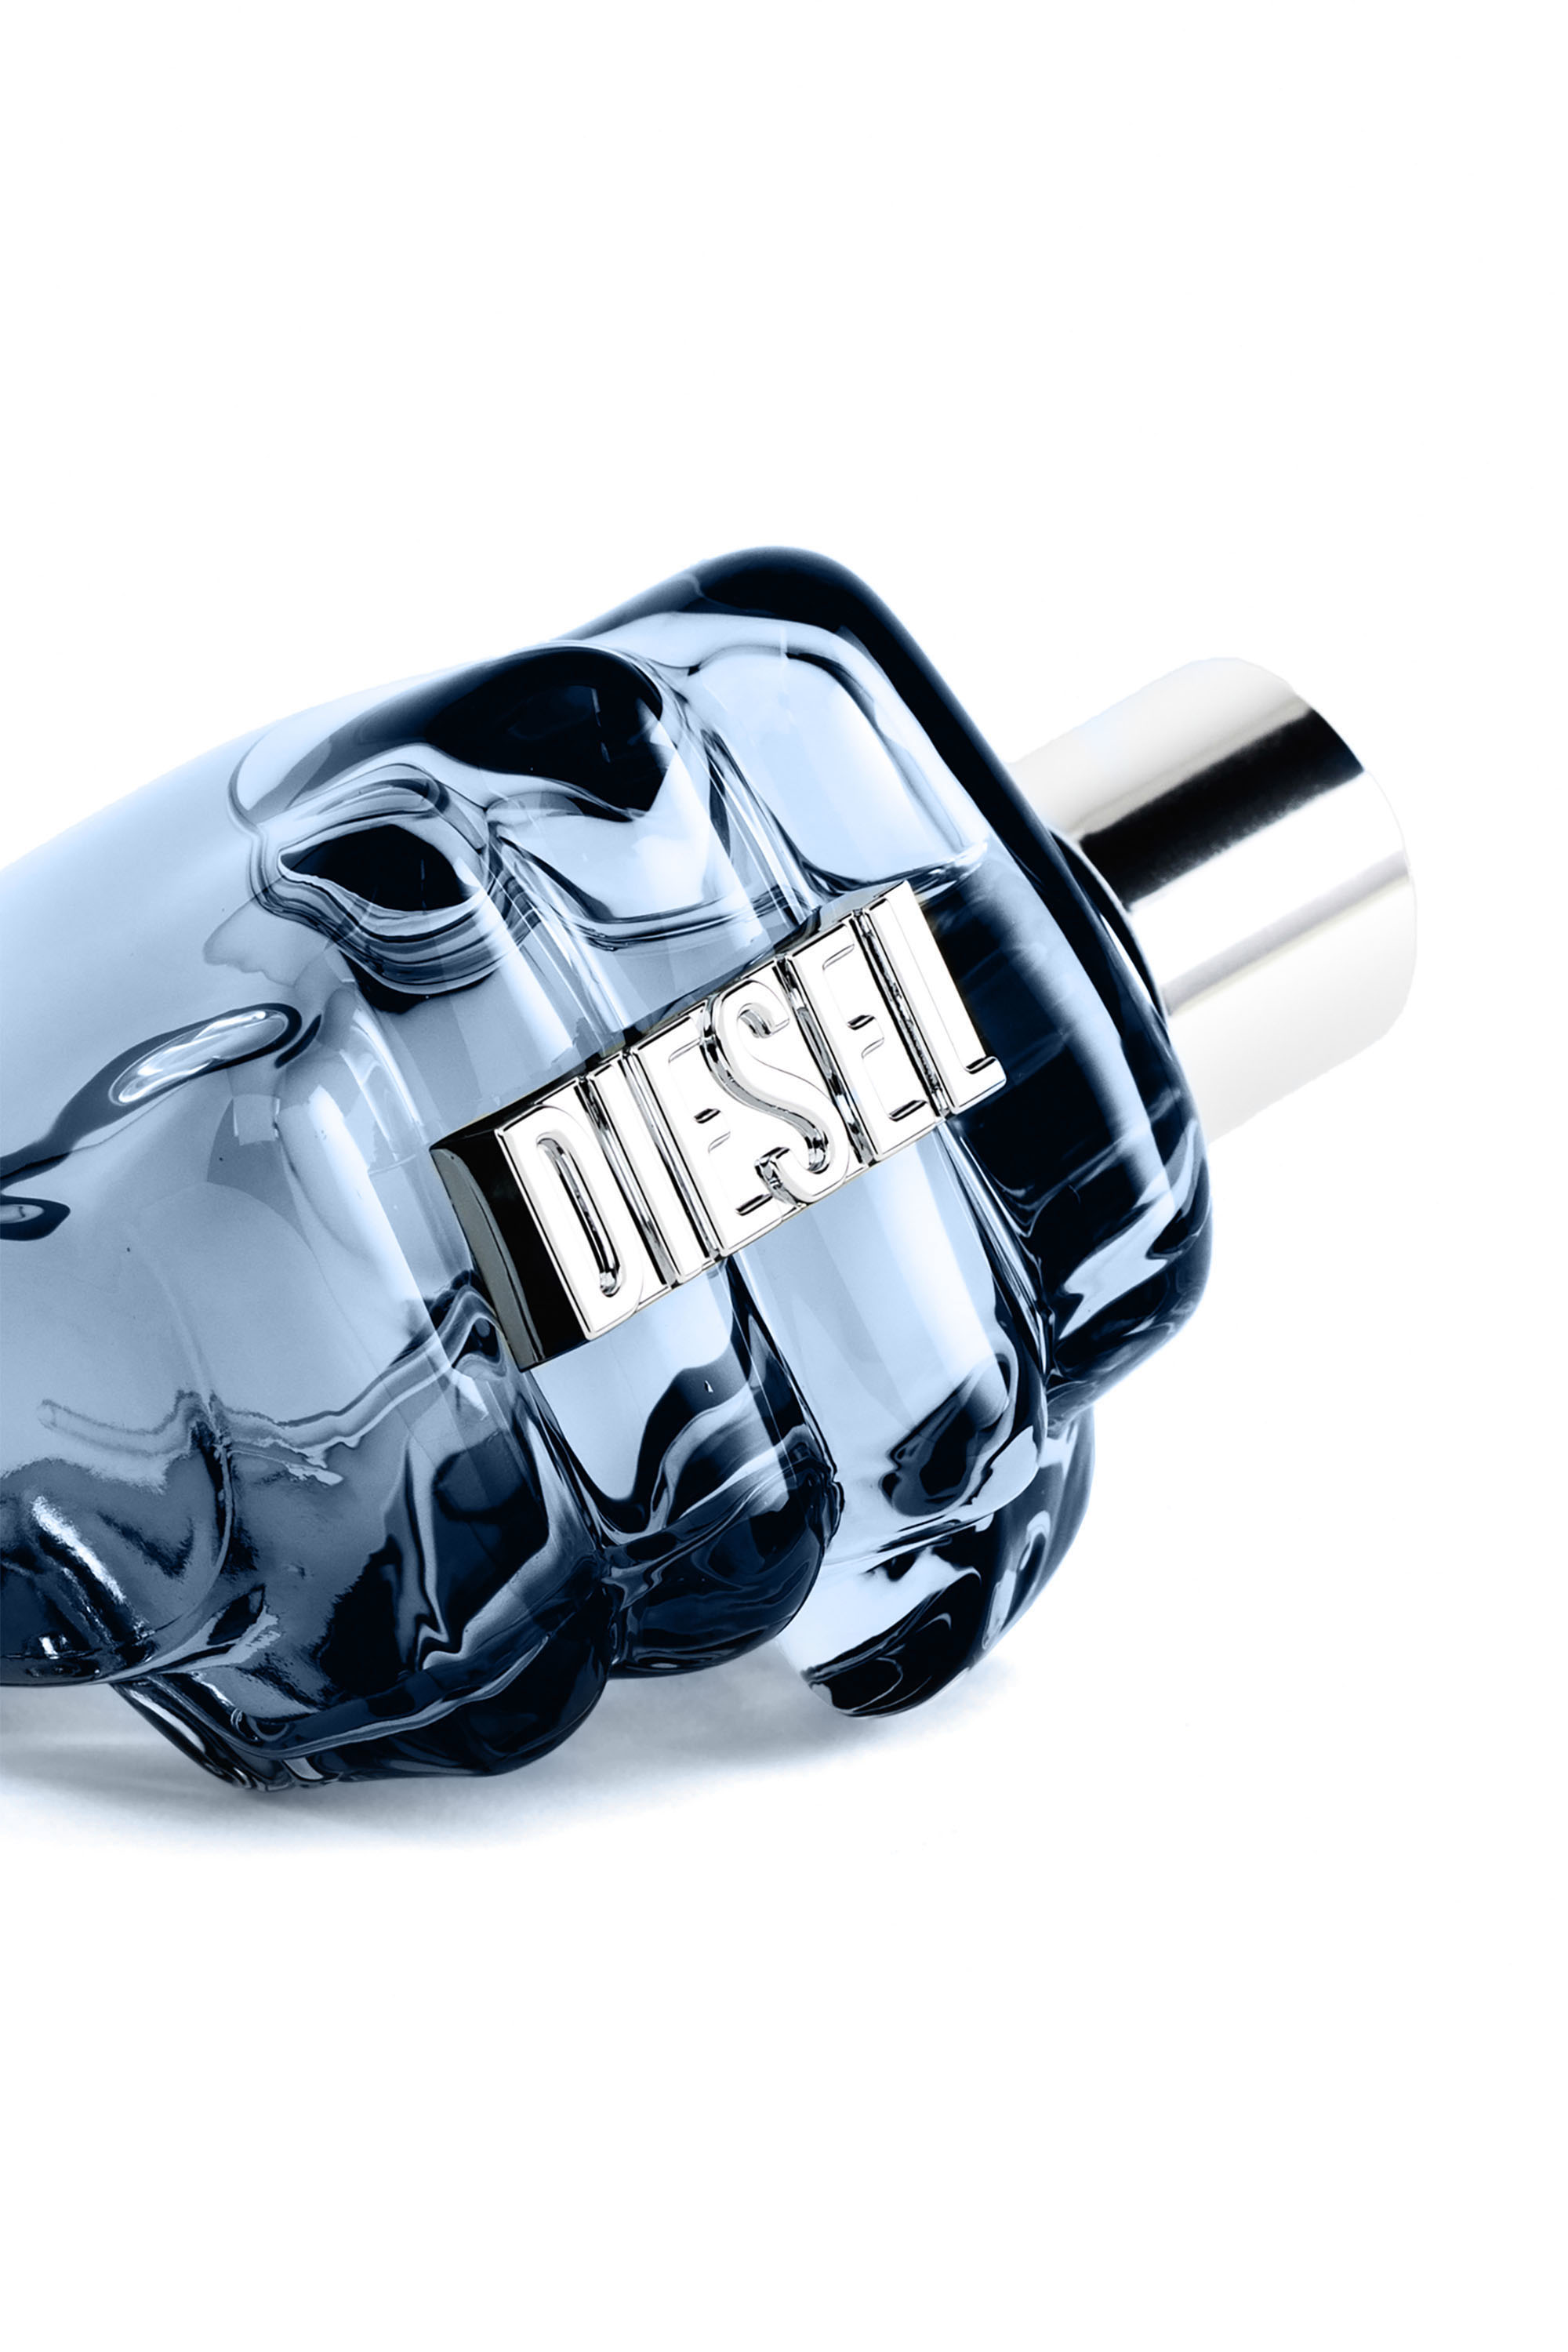 Diesel - ONLY THE BRAVE 50ML, Man Only the brave 50ml, eau de toilette in Blue - Image 3